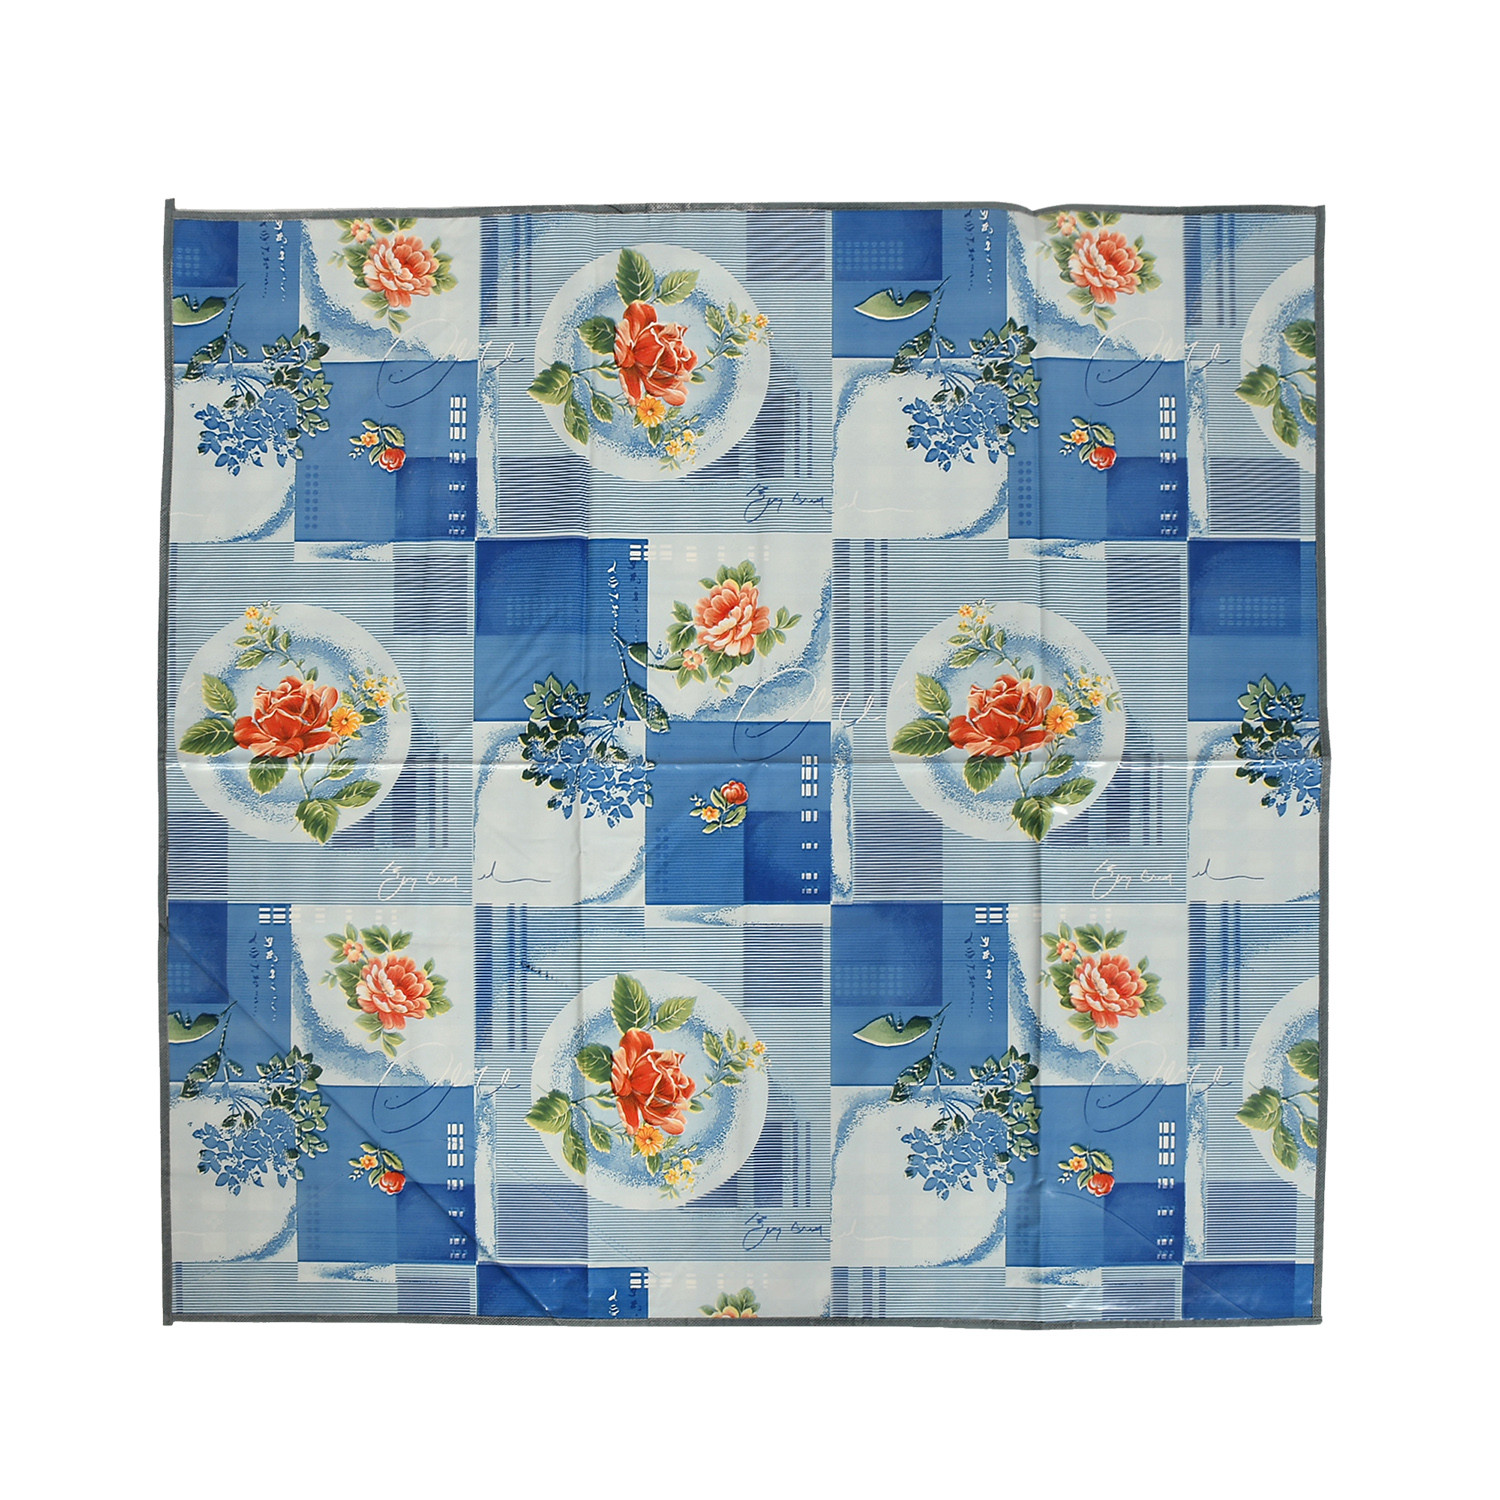 Kuber Industries PVC Floral Print Both Sided Bed Server Food Mat, Bedsheet Protector For Home 36